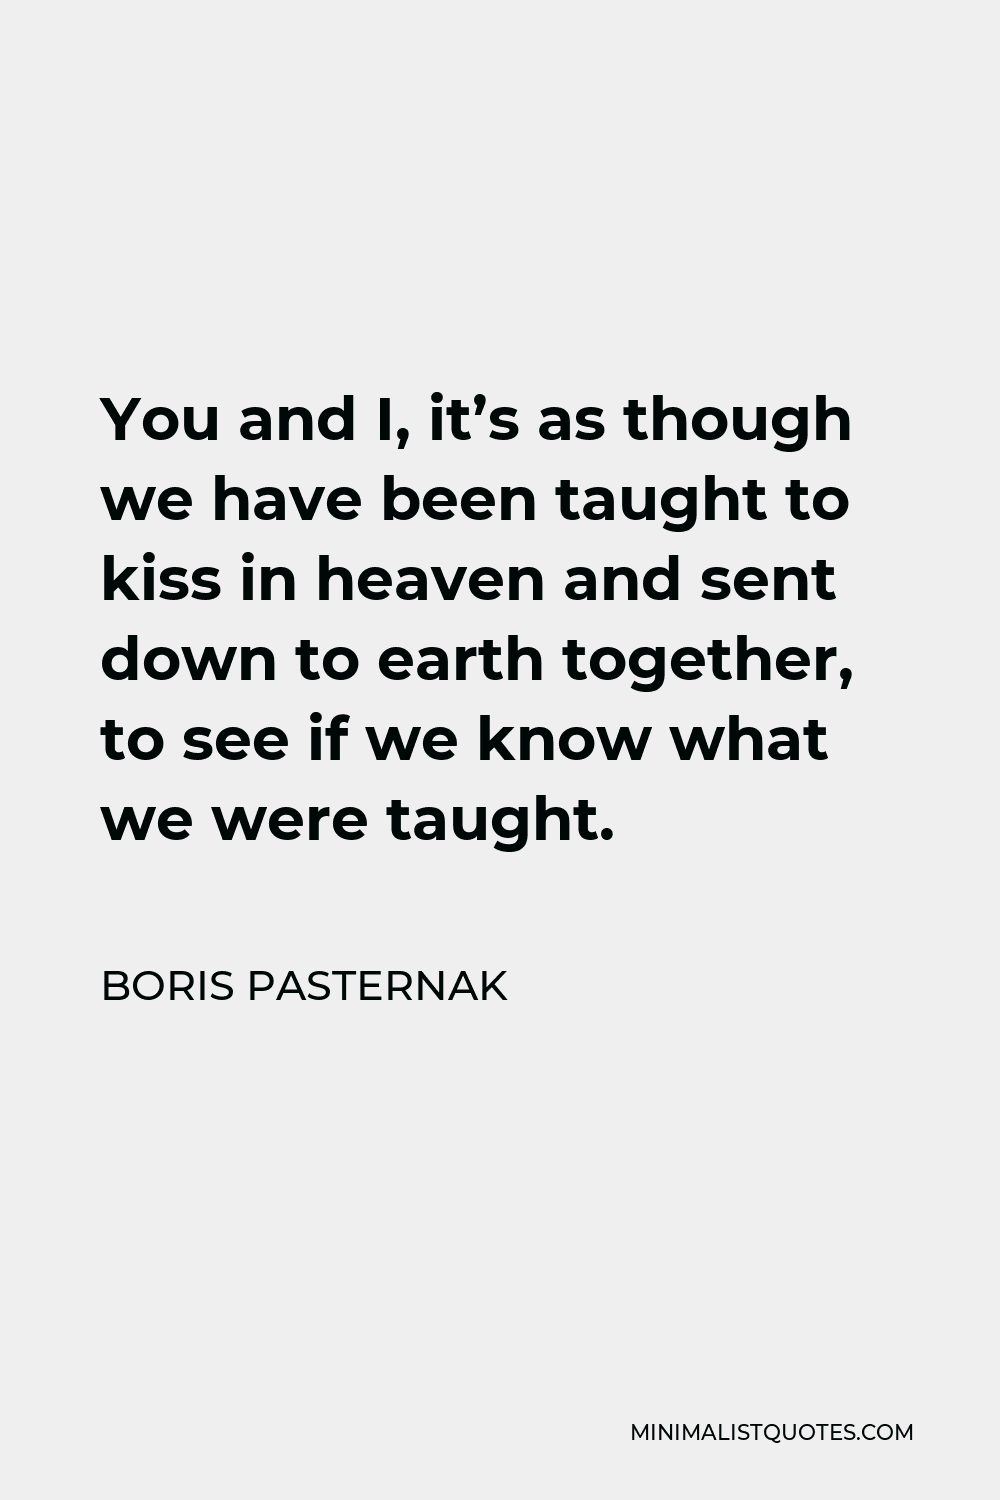 Boris Pasternak Quote - You and I, it’s as though we have been taught to kiss in heaven and sent down to earth together, to see if we know what we were taught.